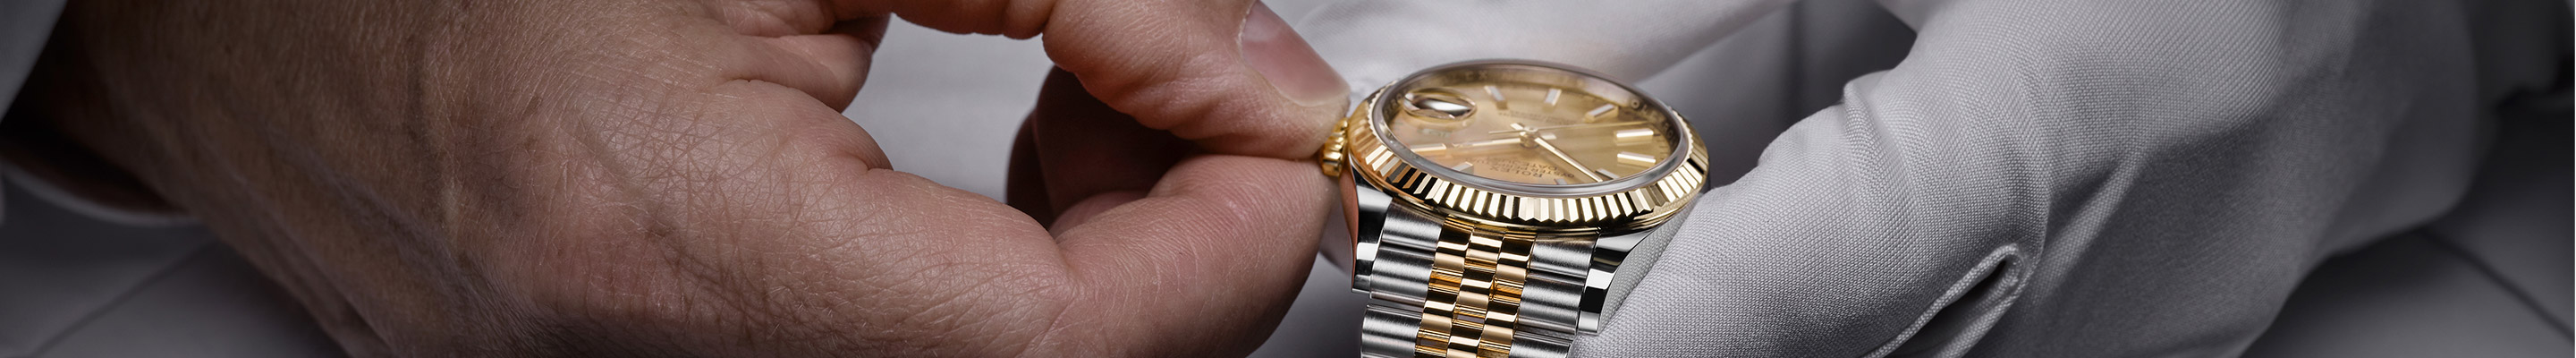 ROLEX WATCH SERVICING AND REPAIR AT Providence Diamond